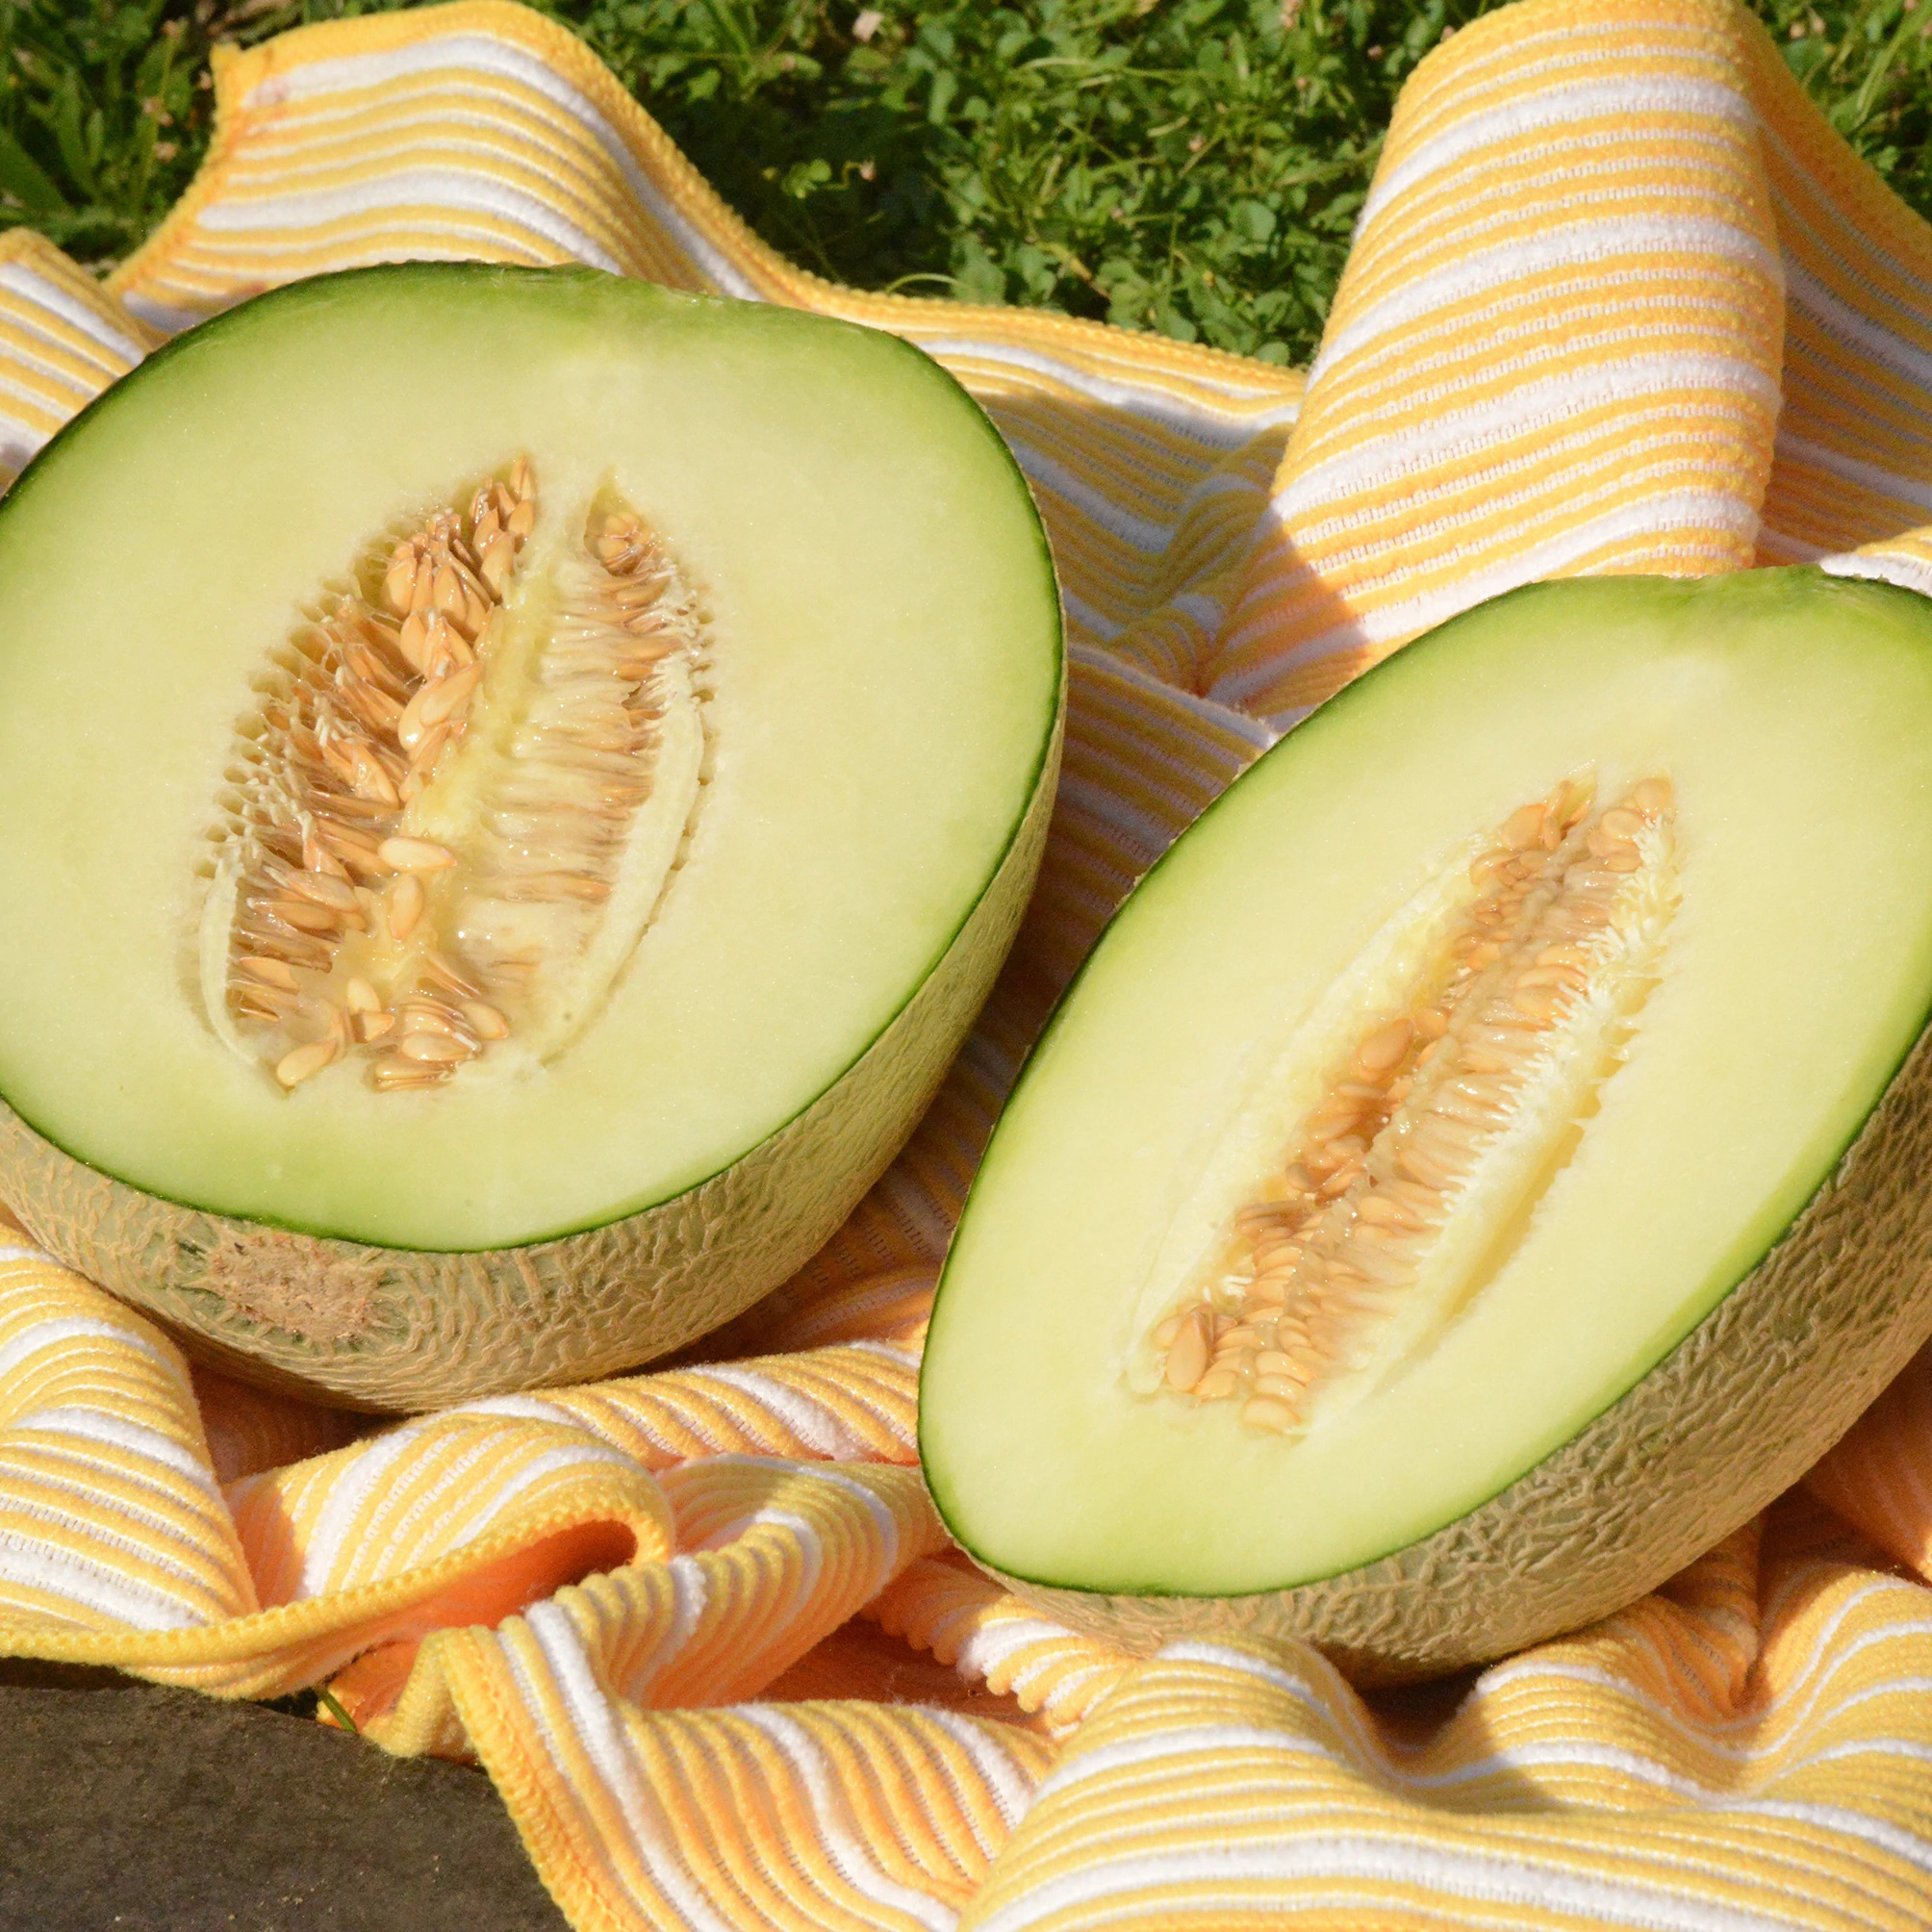 Melon: Japanese muskmelon, Has a green skin, covered in whitish veins. 2010x2010 HD Wallpaper.